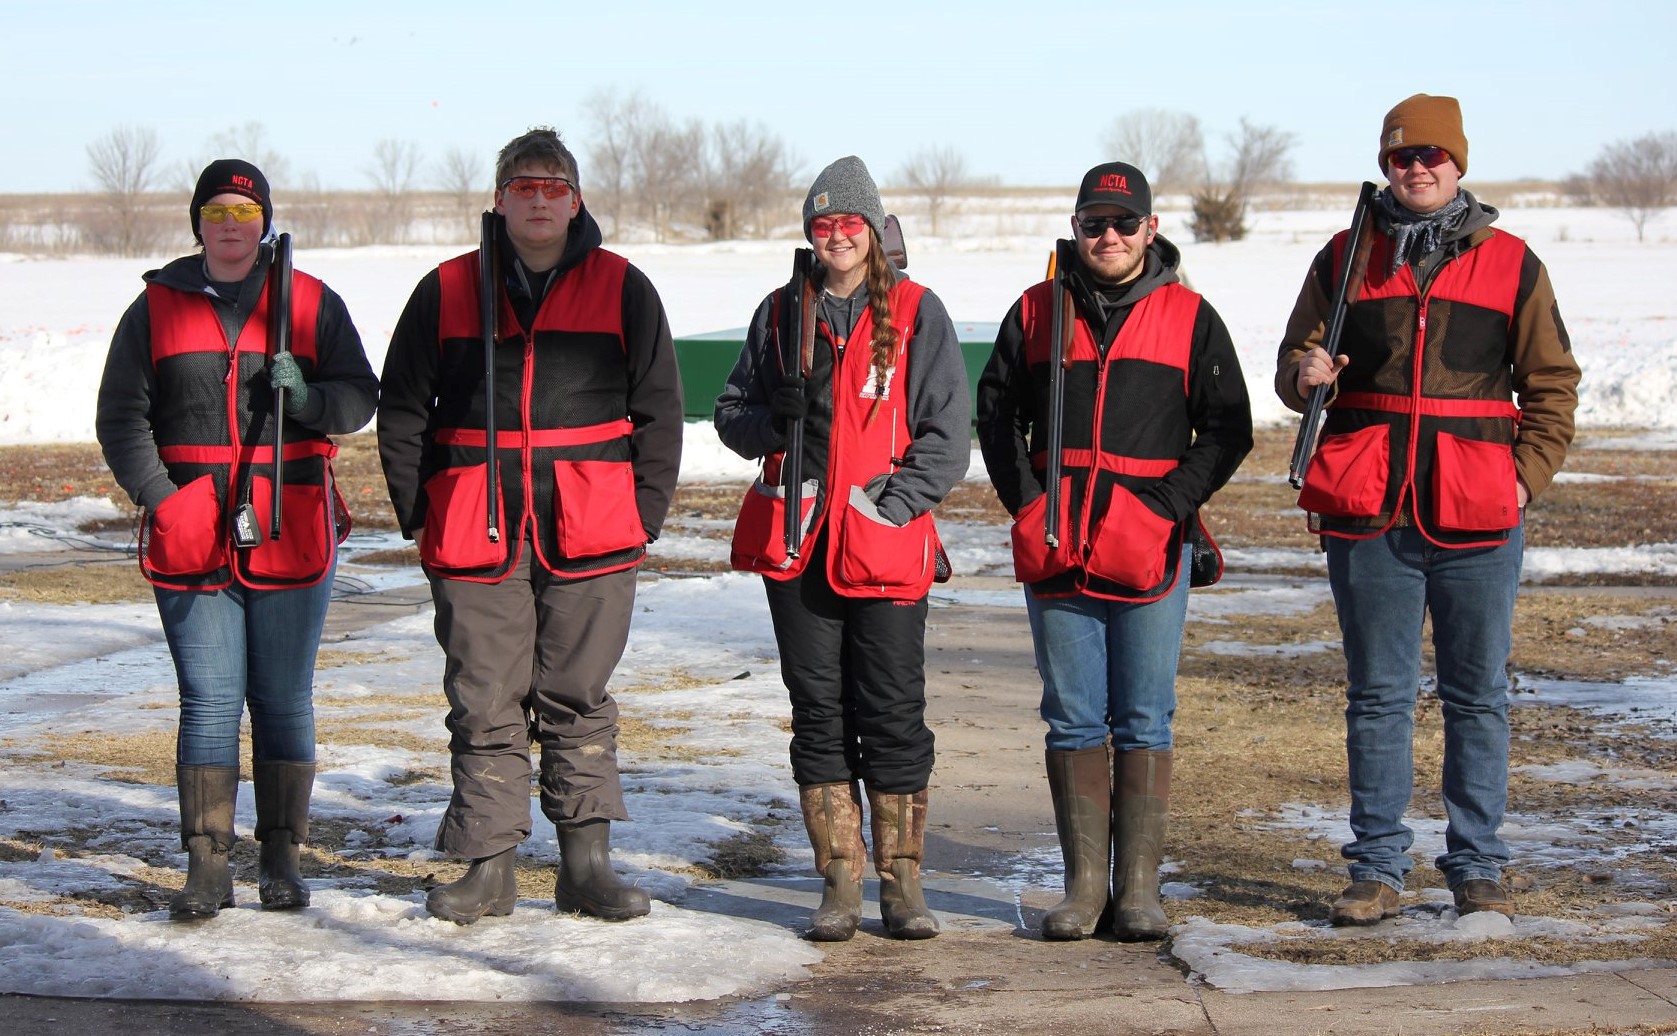 NCTA Aggies braved cold, wintry conditions Saturday at the Lincoln Skeet & Trap Club, from left, Kaylee Hostler, Central City; Trevor Kuhn, Omaha; Angela Crouse, Haigler; David Jelken, Juniata; and Chase Stanley, Shickley. (Jody Crouse photo)